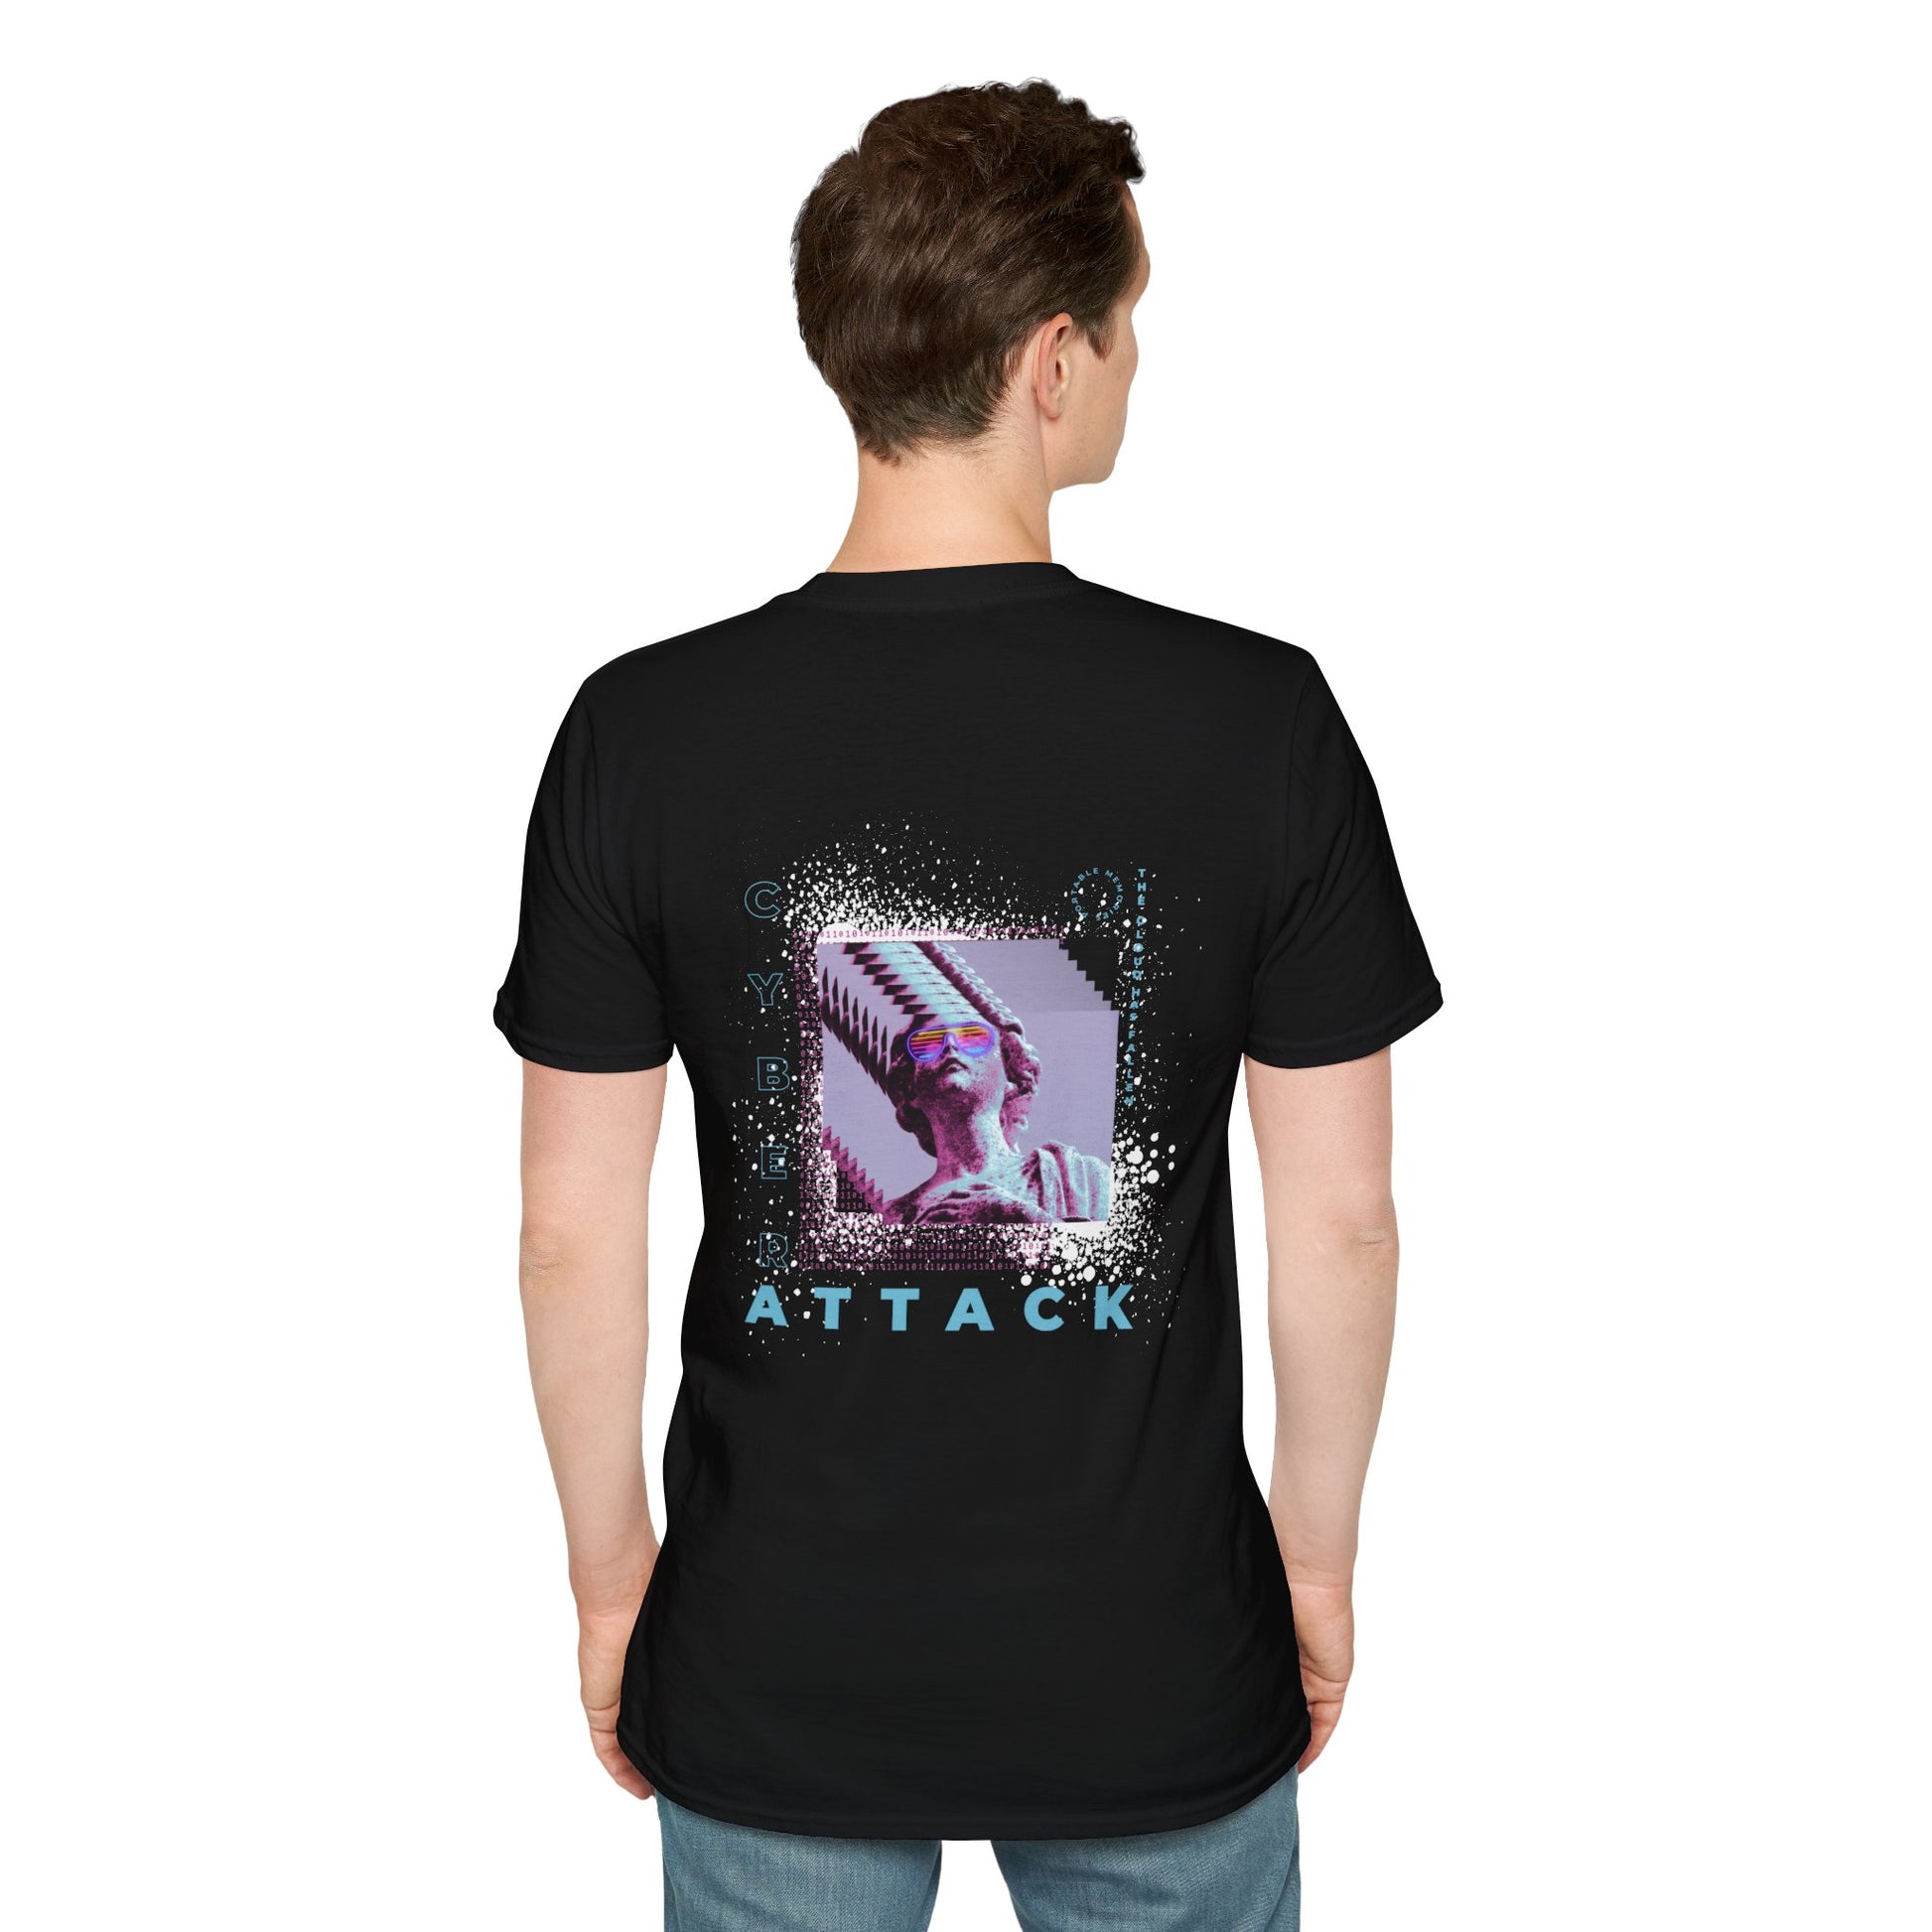 Black T-shirt with a pixelated Statue of Liberty and modern glitch art design